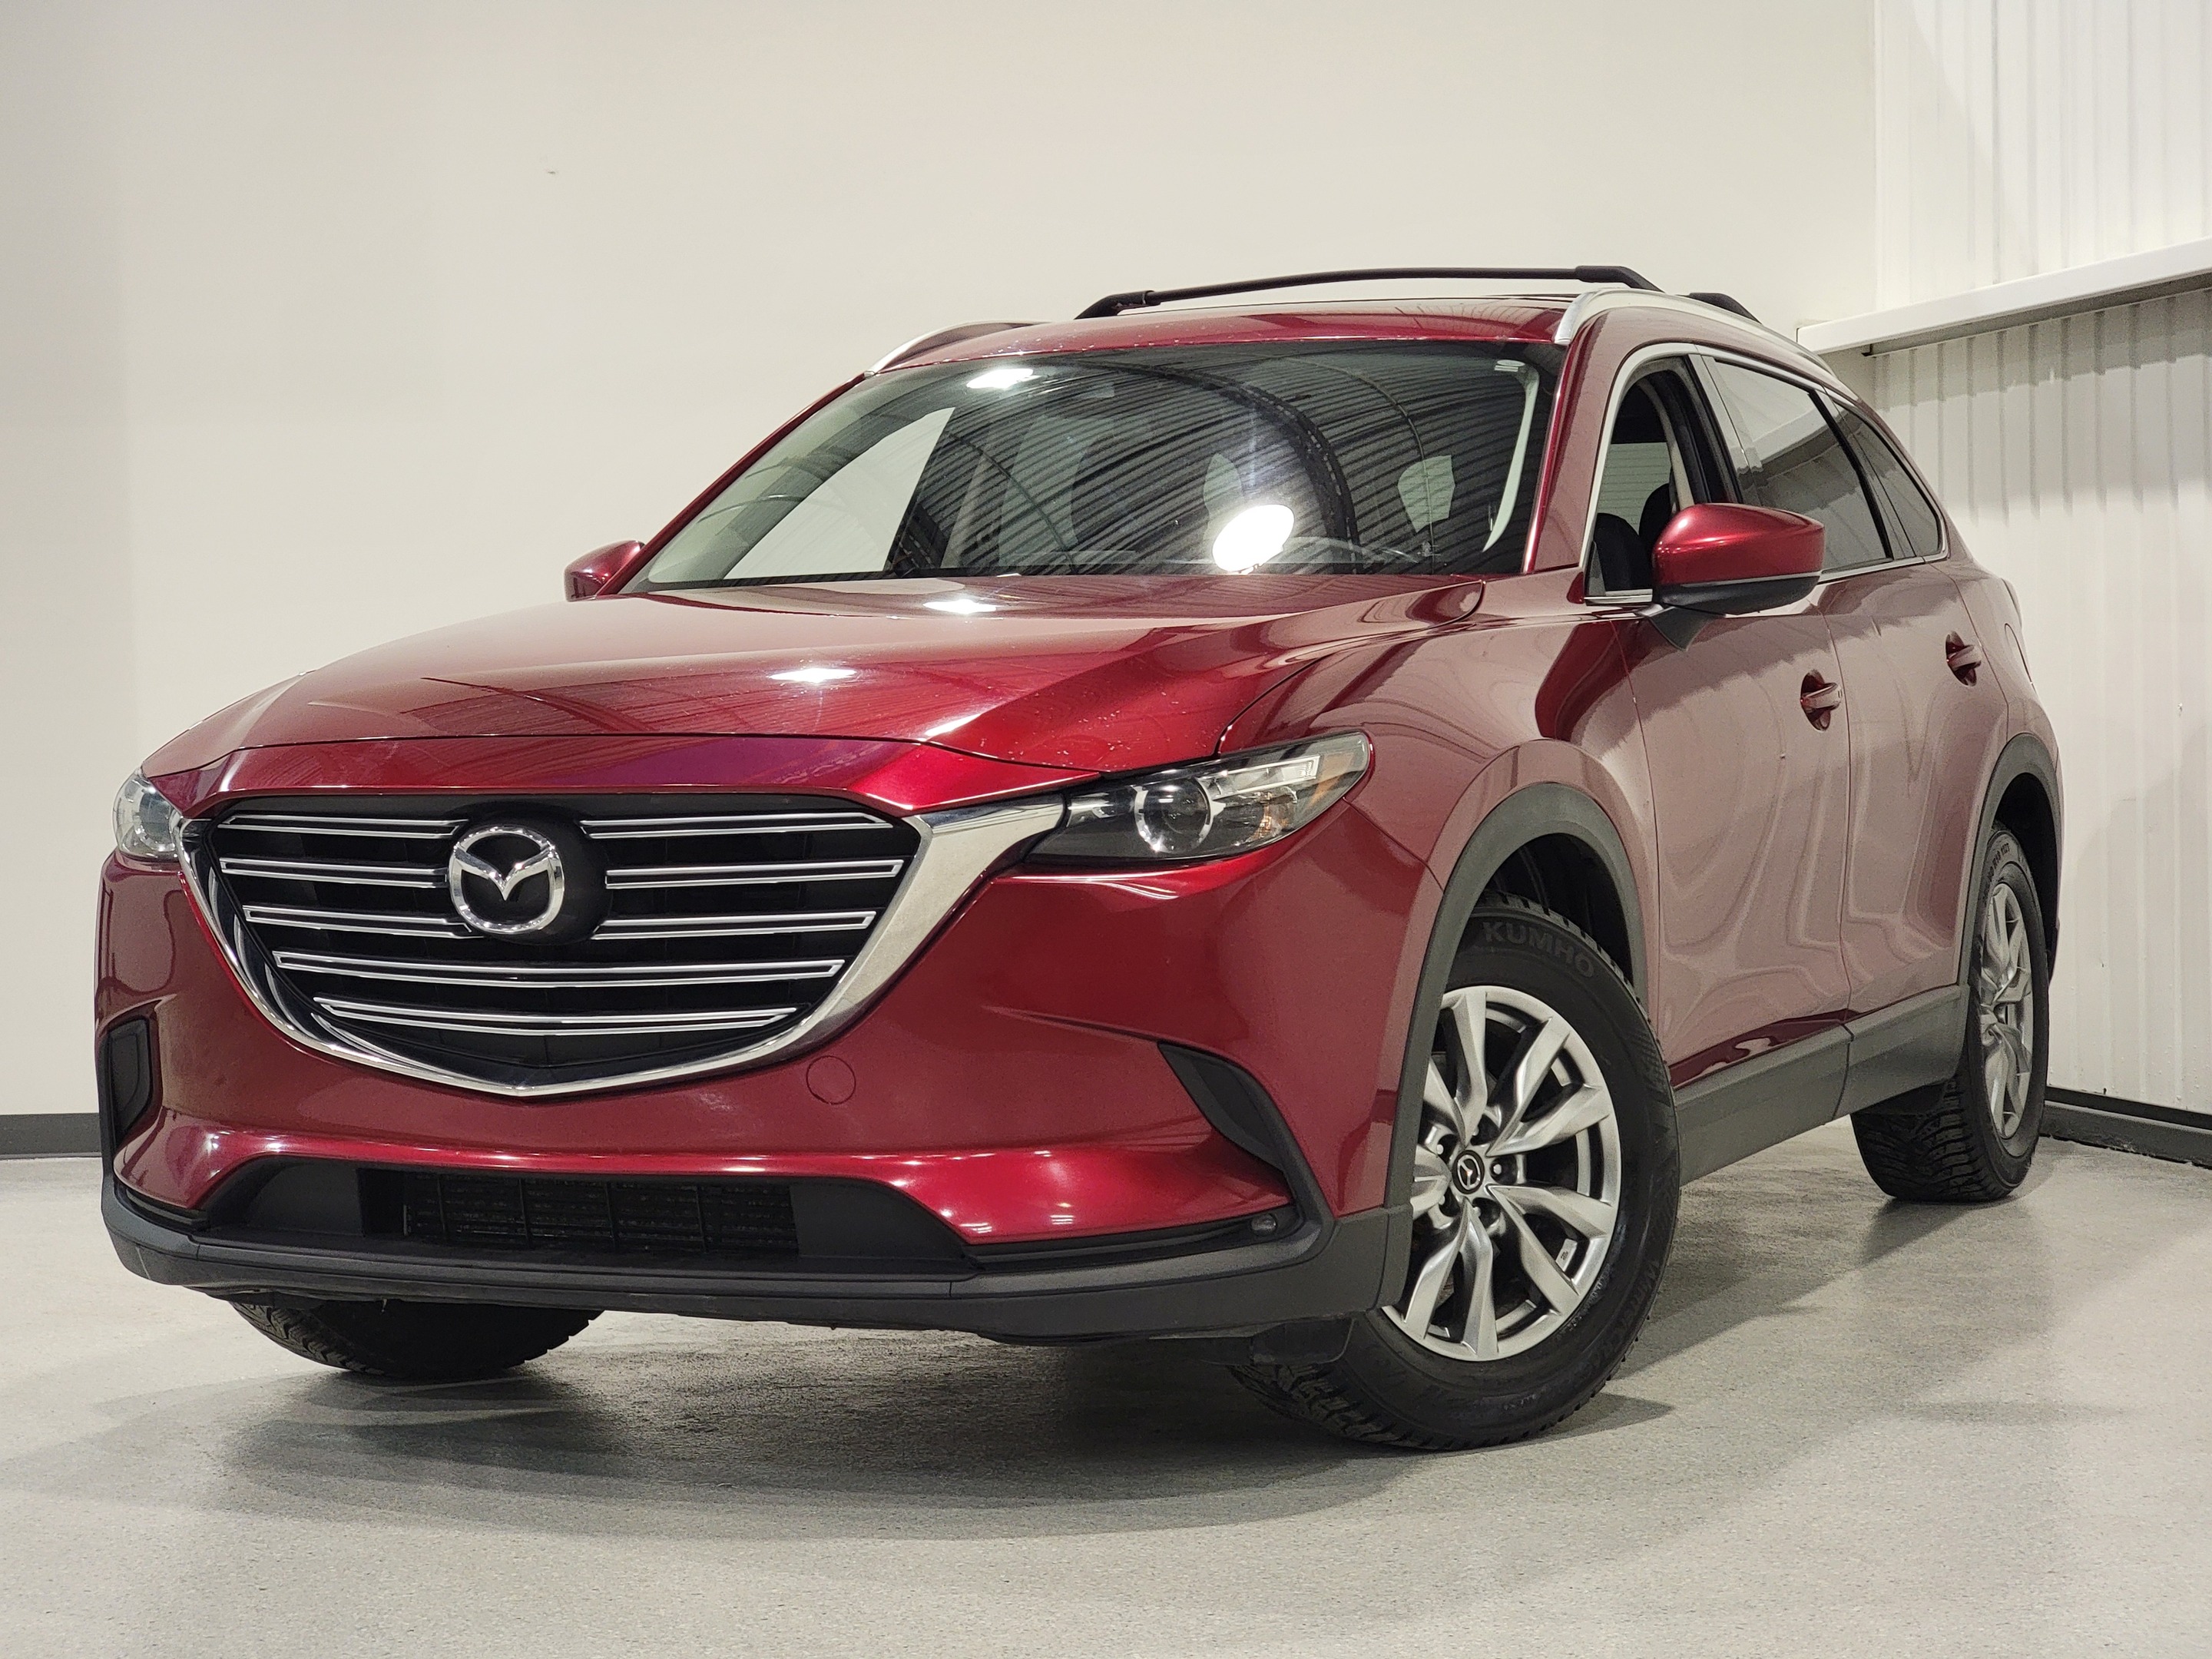 2018 Mazda CX-9 GS-L AWD - TOIT OUVRANT, CUIR, 7 PASSAGERS